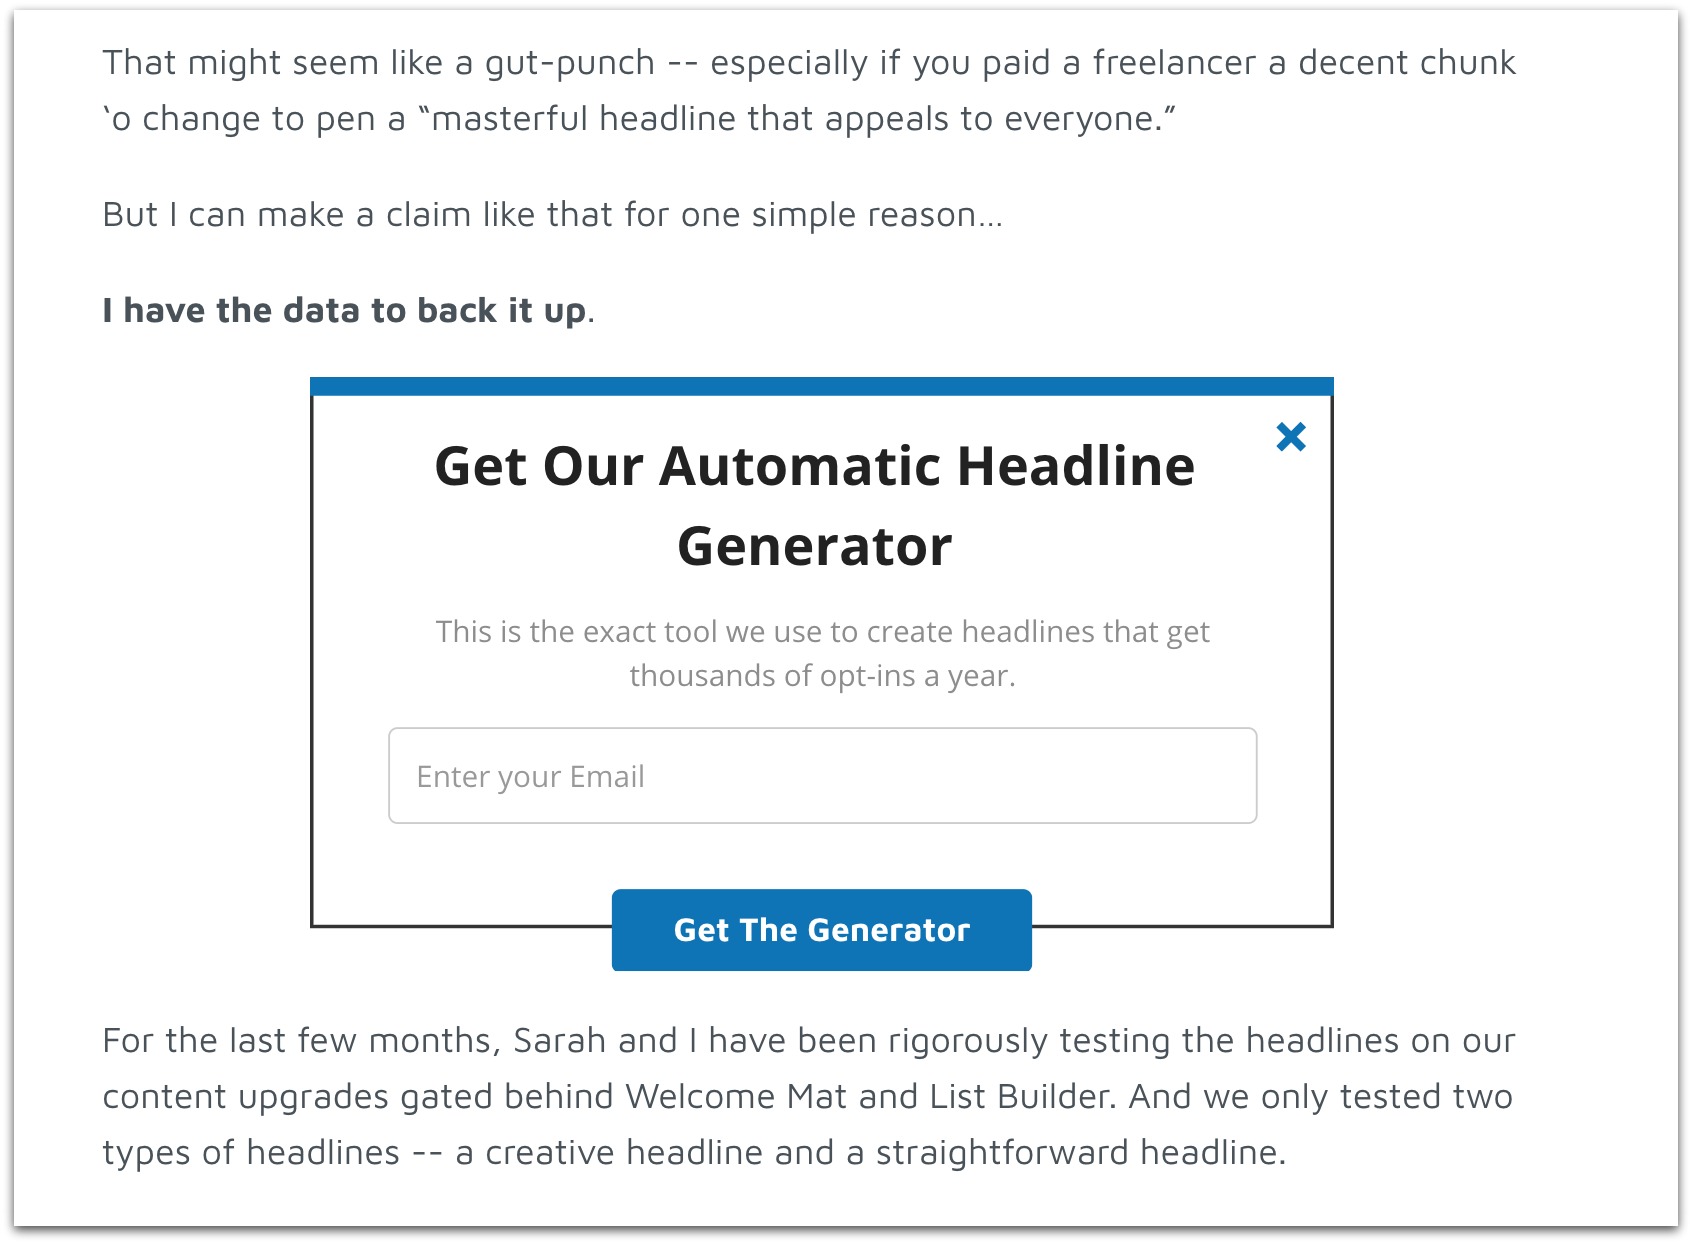 get our automatic headline generator